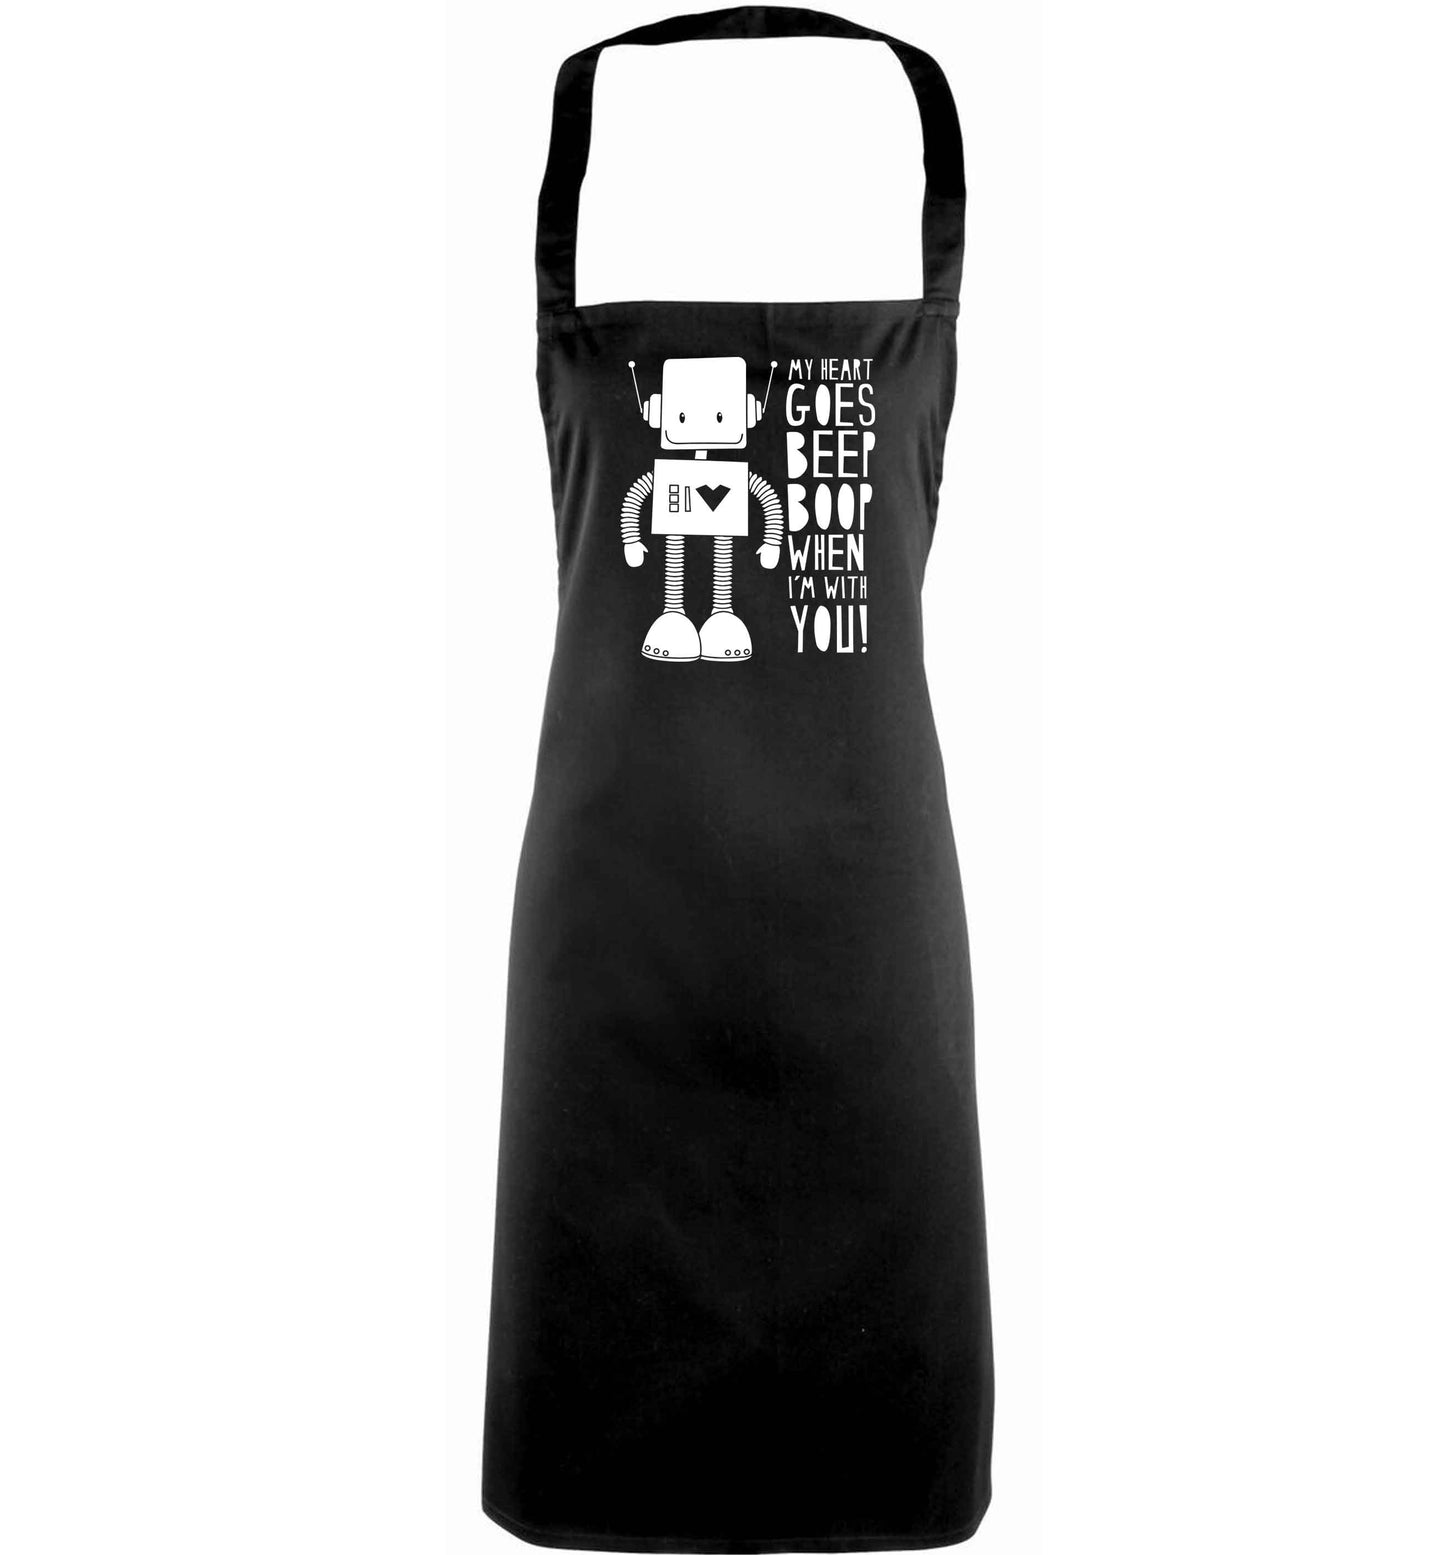 My heart goes beep boop when I'm with you adults black apron